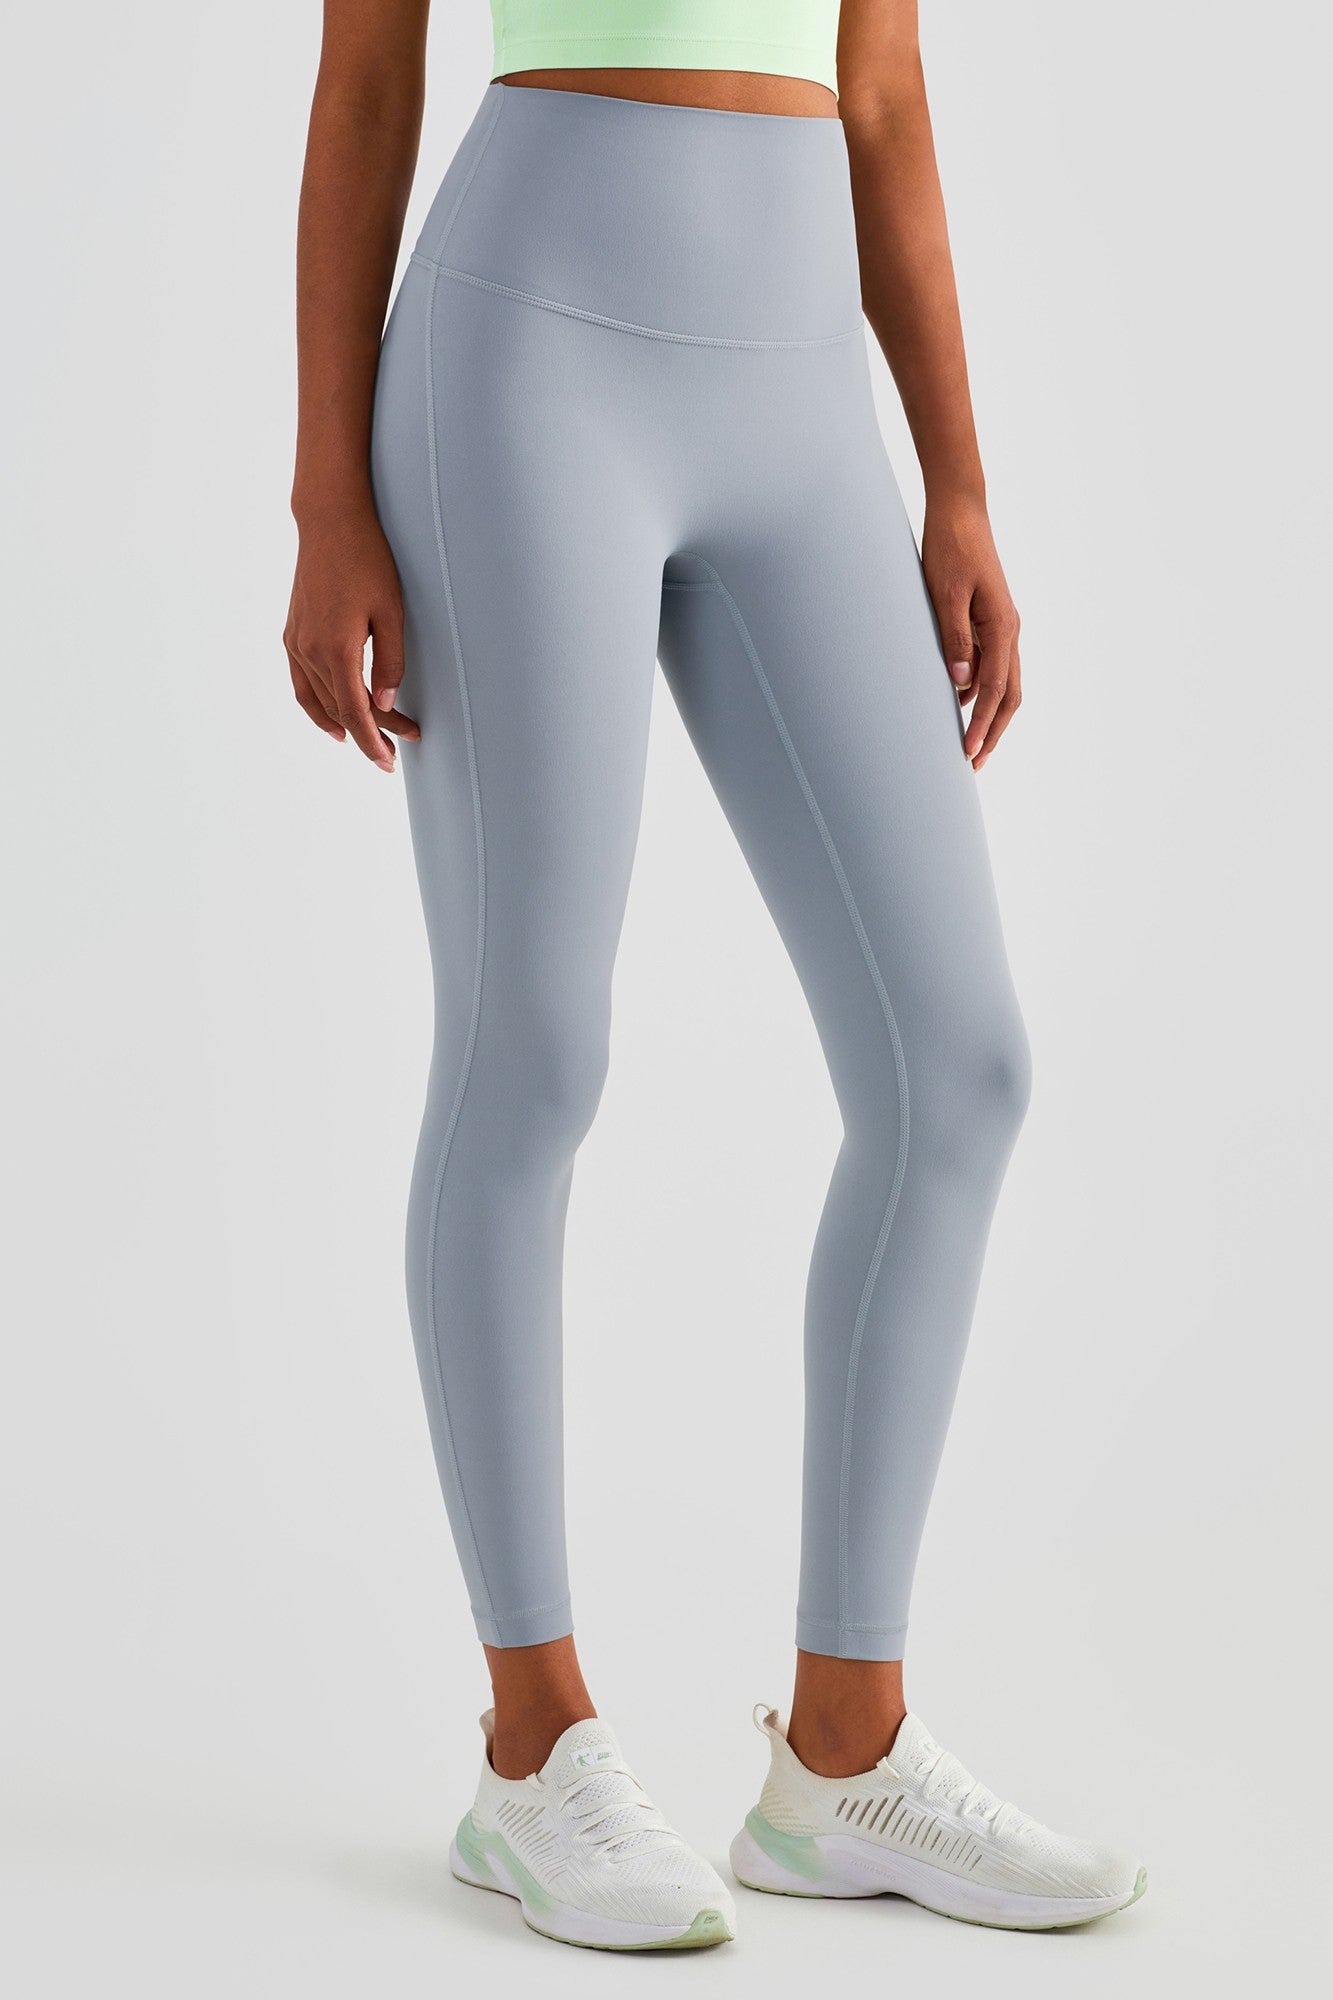 No Front Seam Leggings with Multi-Pockets  Leggings, High waisted leggings,  Seamless leggings